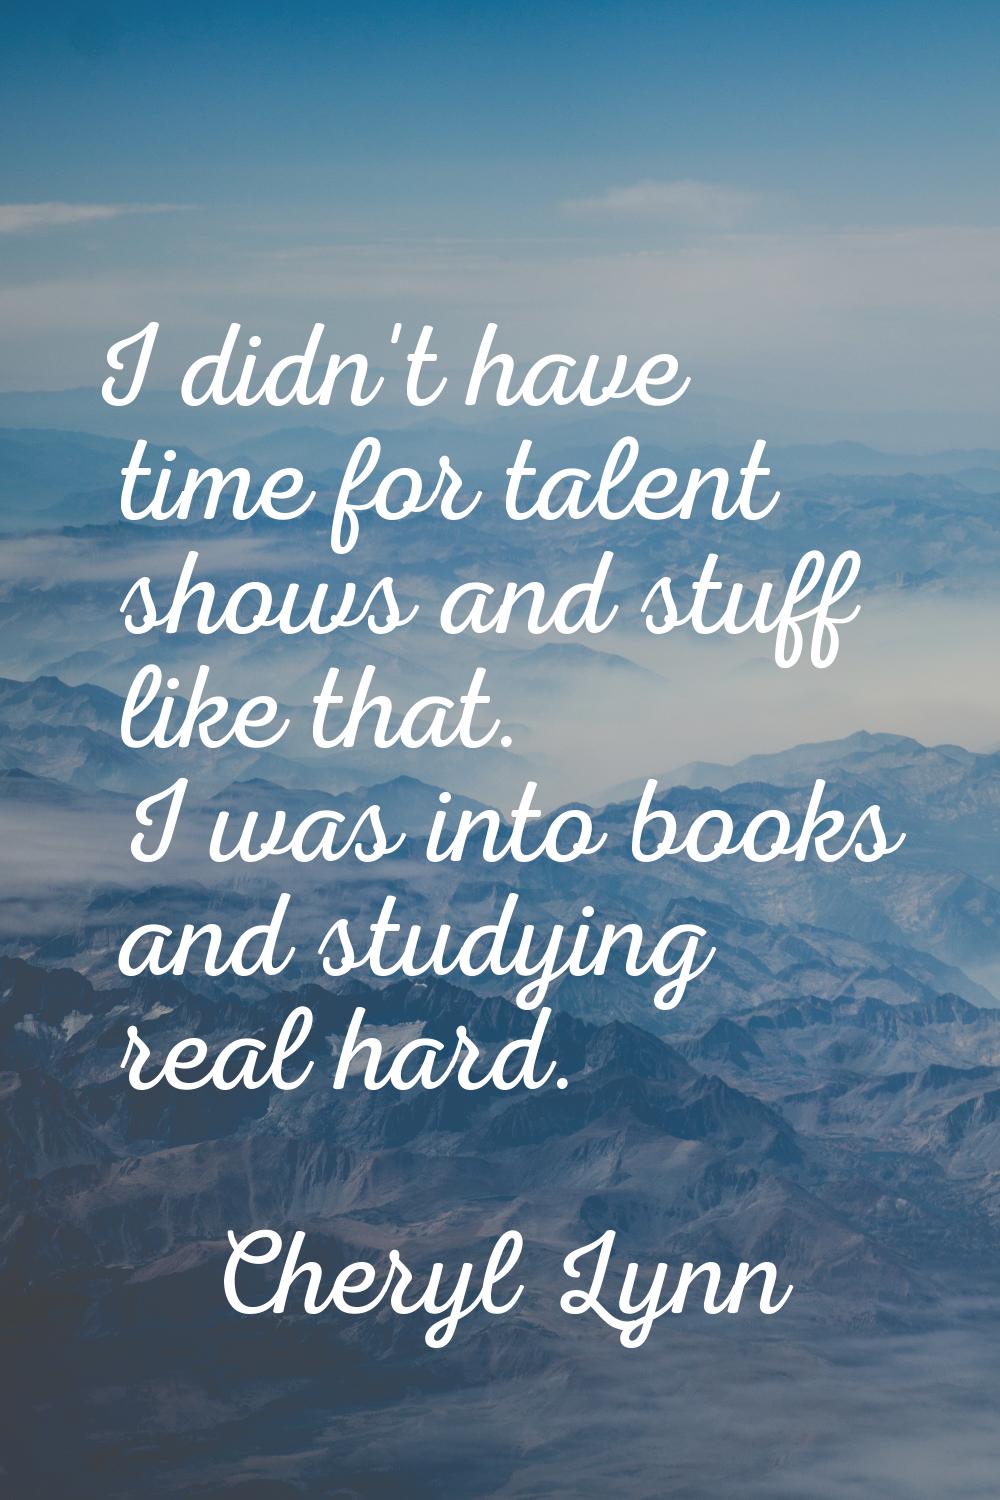 I didn't have time for talent shows and stuff like that. I was into books and studying real hard.